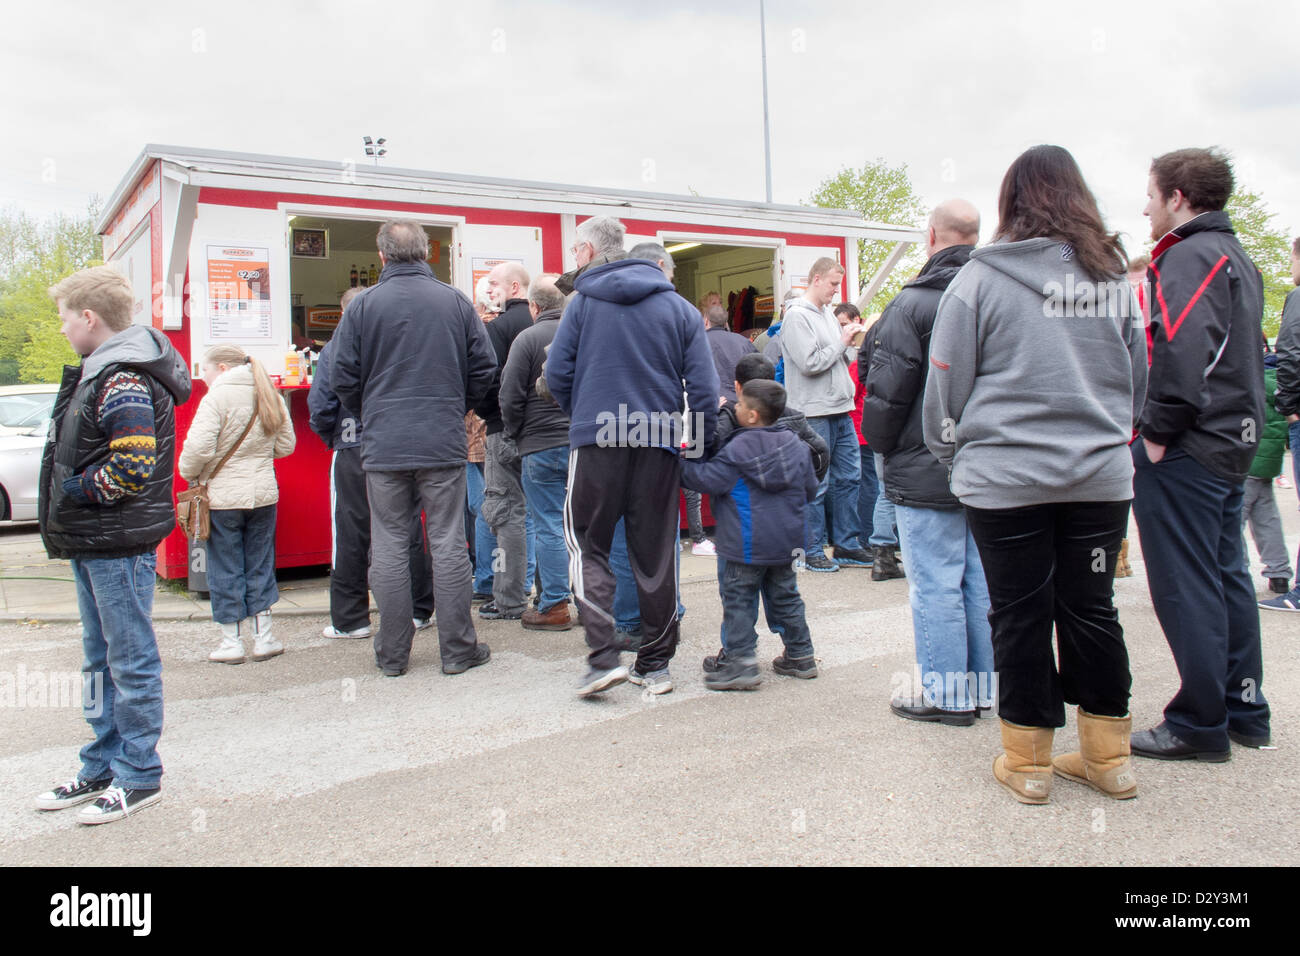 Don Valley Stadium Sheffield, South Yorkshire, England, Uk.  Soccer fans queuing for food at half time Stock Photo